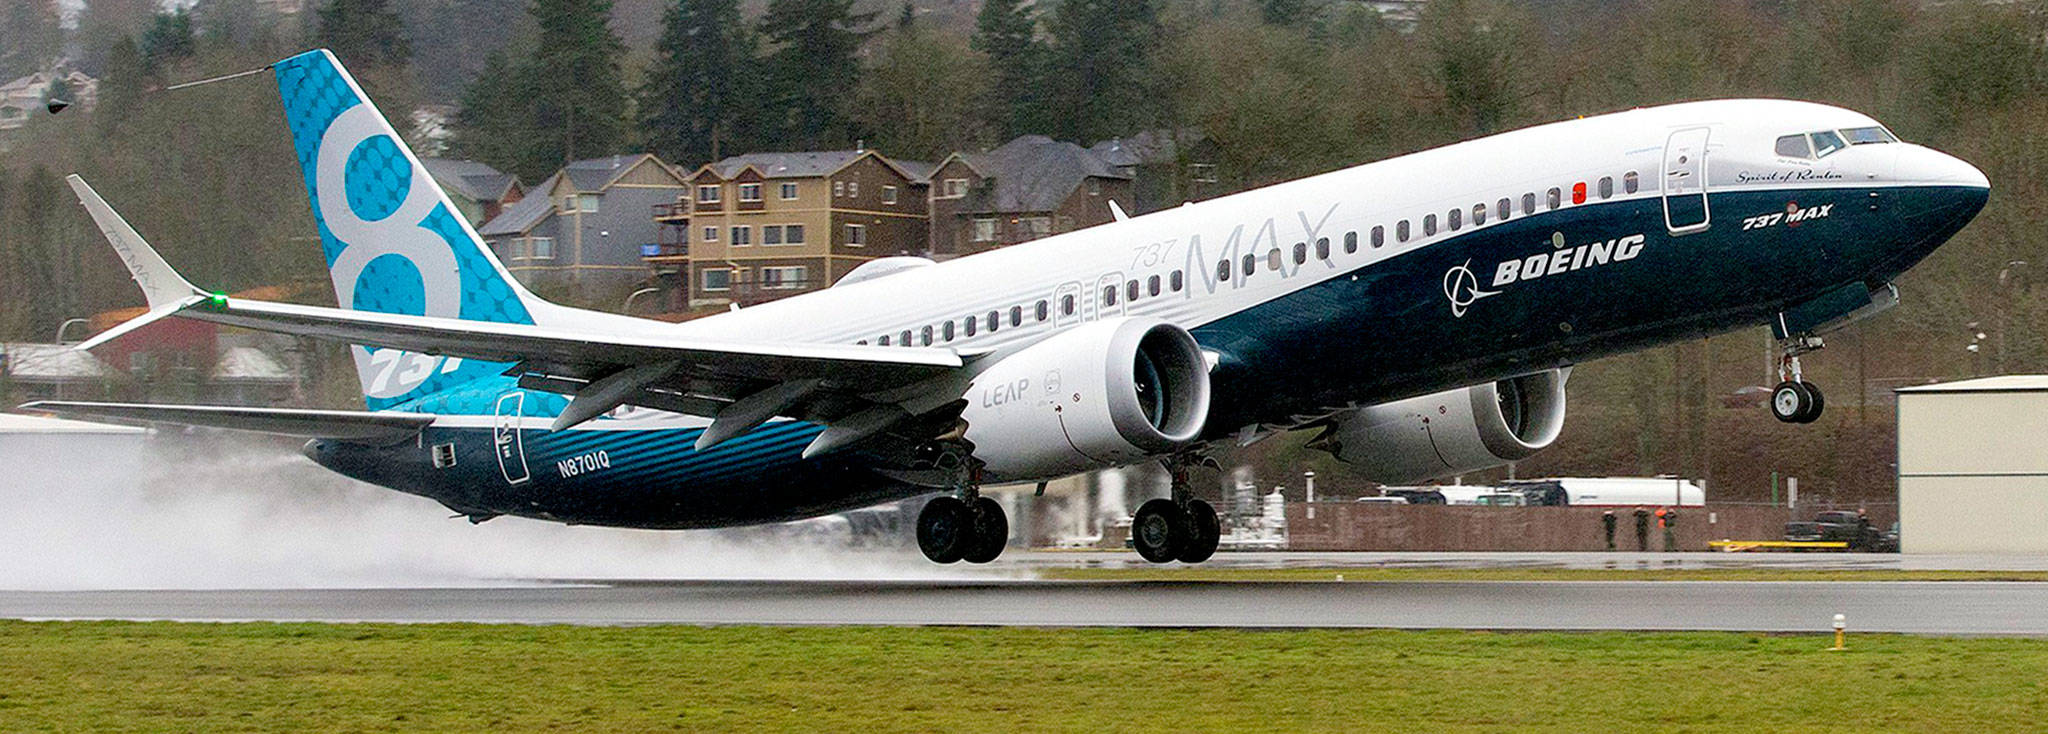 Seven weeks after it rolled out of the paint hangar, Boeing’s first 737 MAX, the Spirit of Renton, flies for the first time Jan. 29, 2016, from Renton Municipal Airport. (Mike Siegel/The Seattle Times/TNS, file)